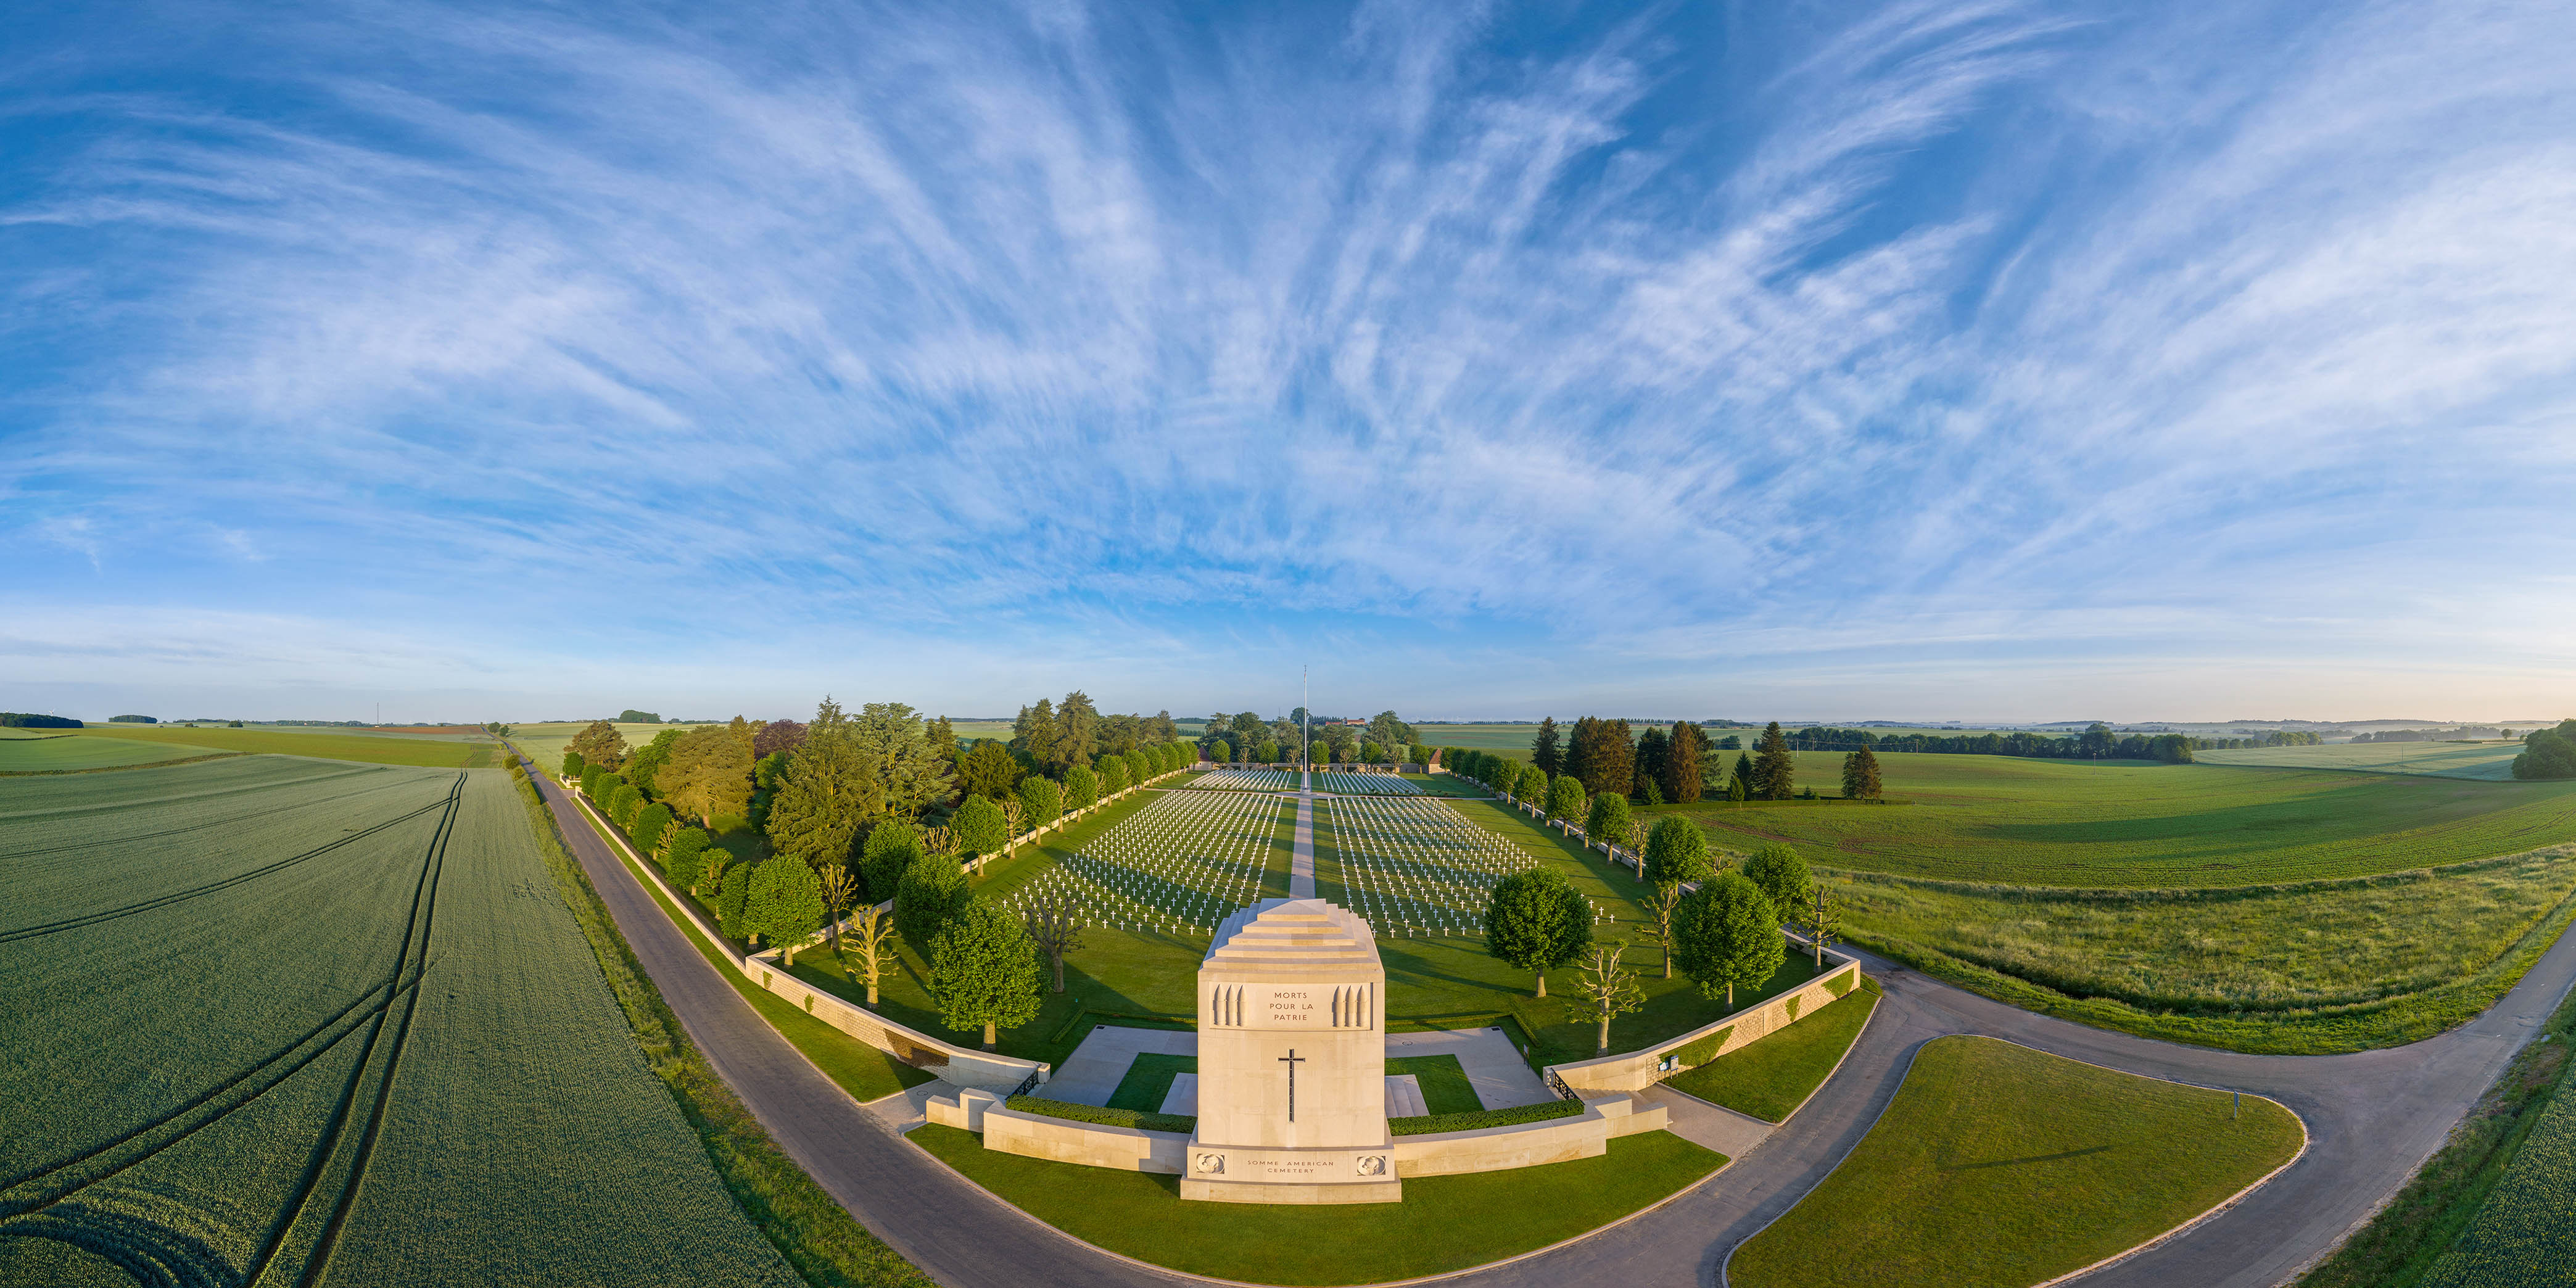 Panoramic view of Somme American Cemetery from virtual tour